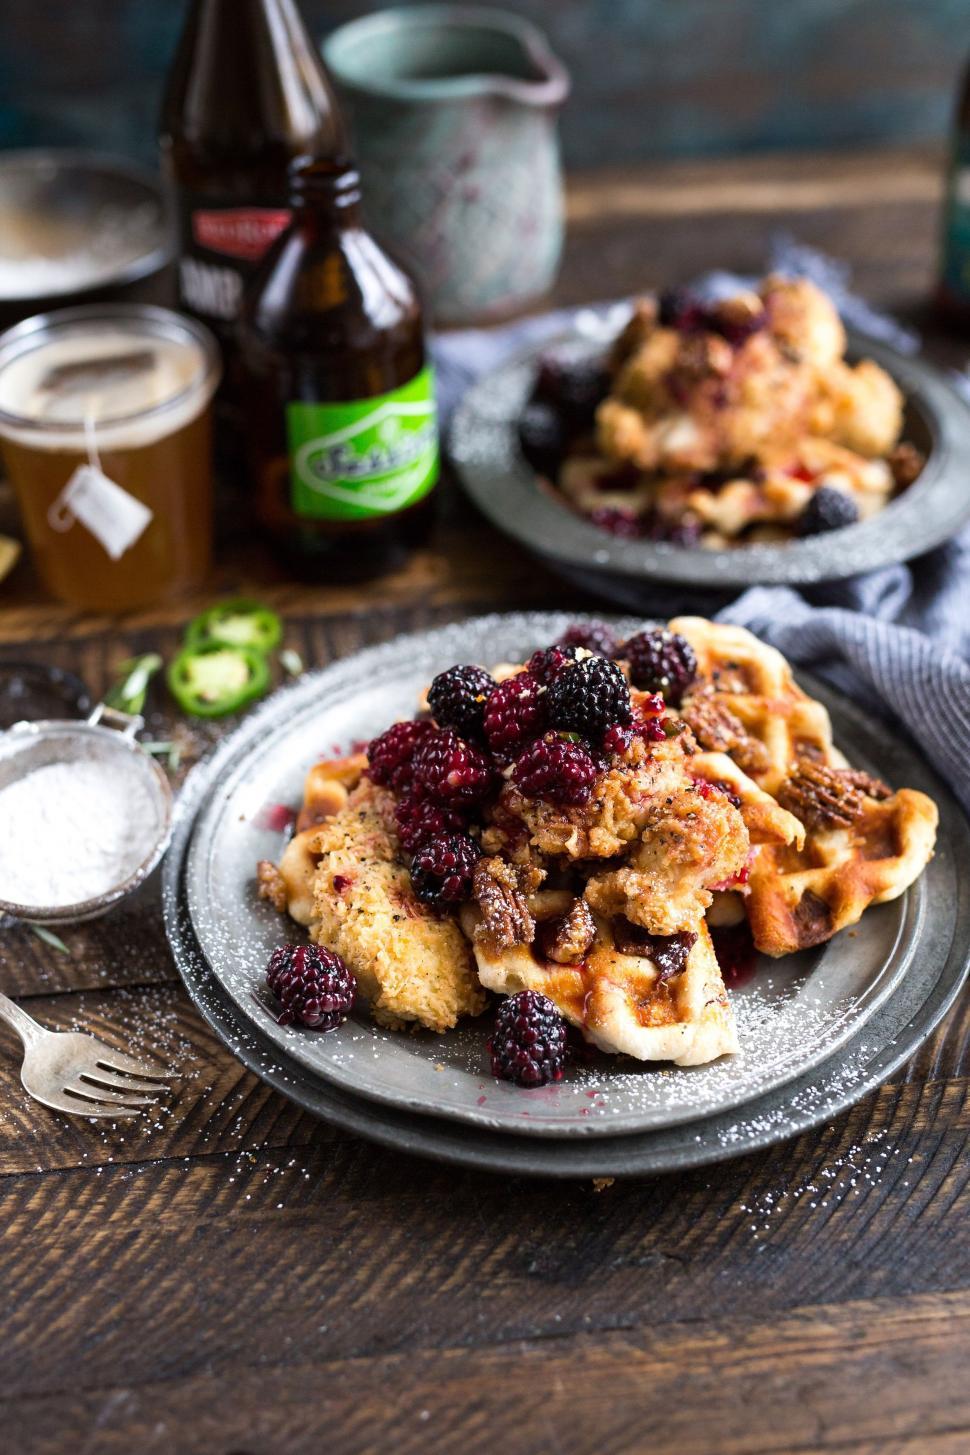 Free Image of Plate of Waffles Topped With Berries and Syrup 